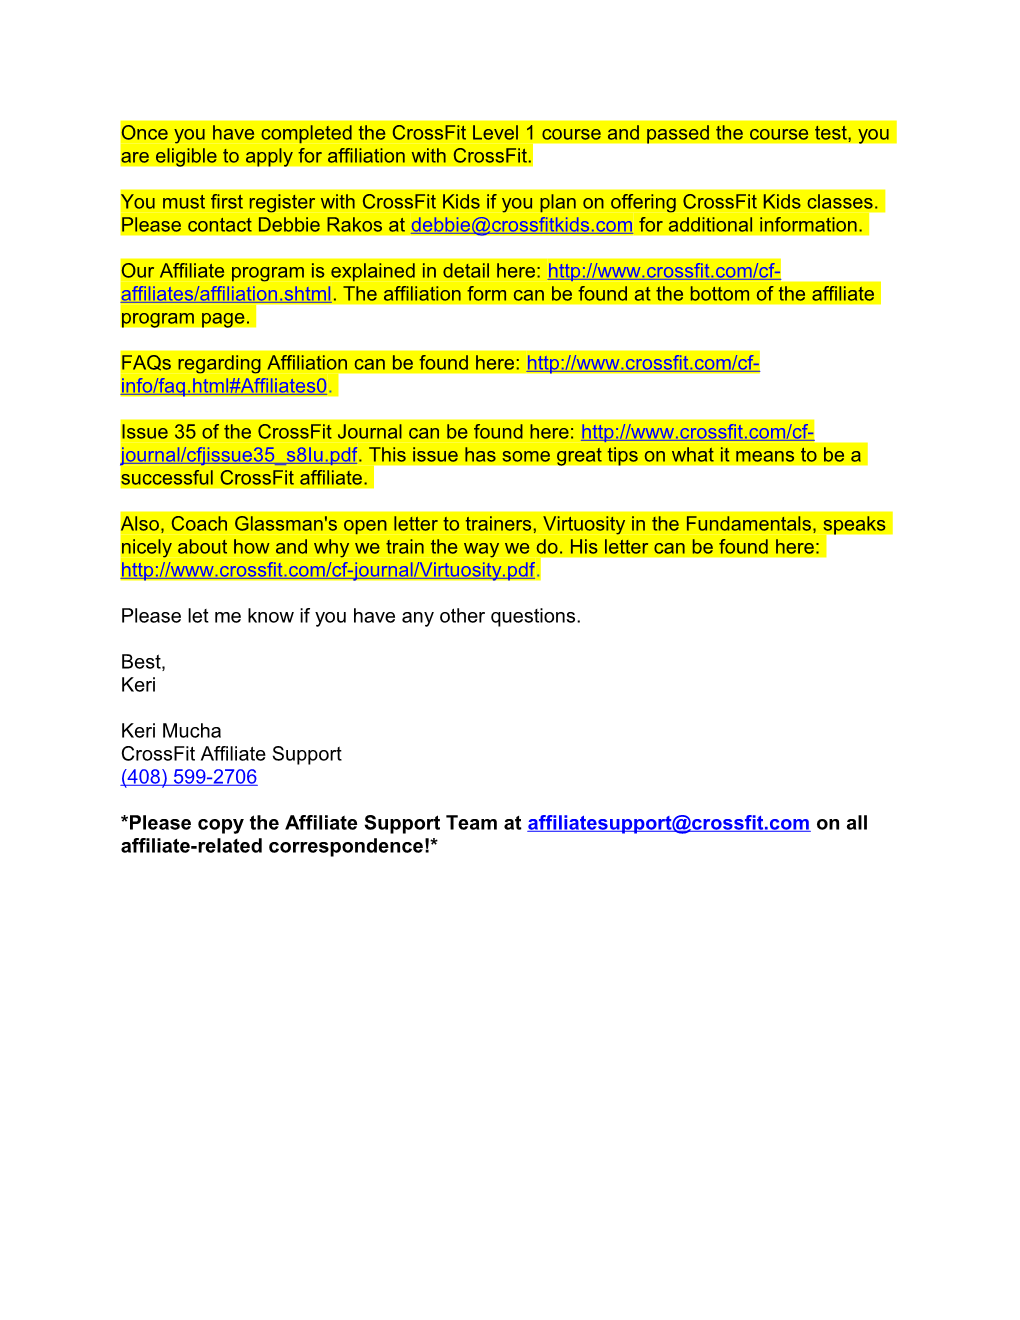 Email to Crossfit Head Quarters Affiliates Questions Email